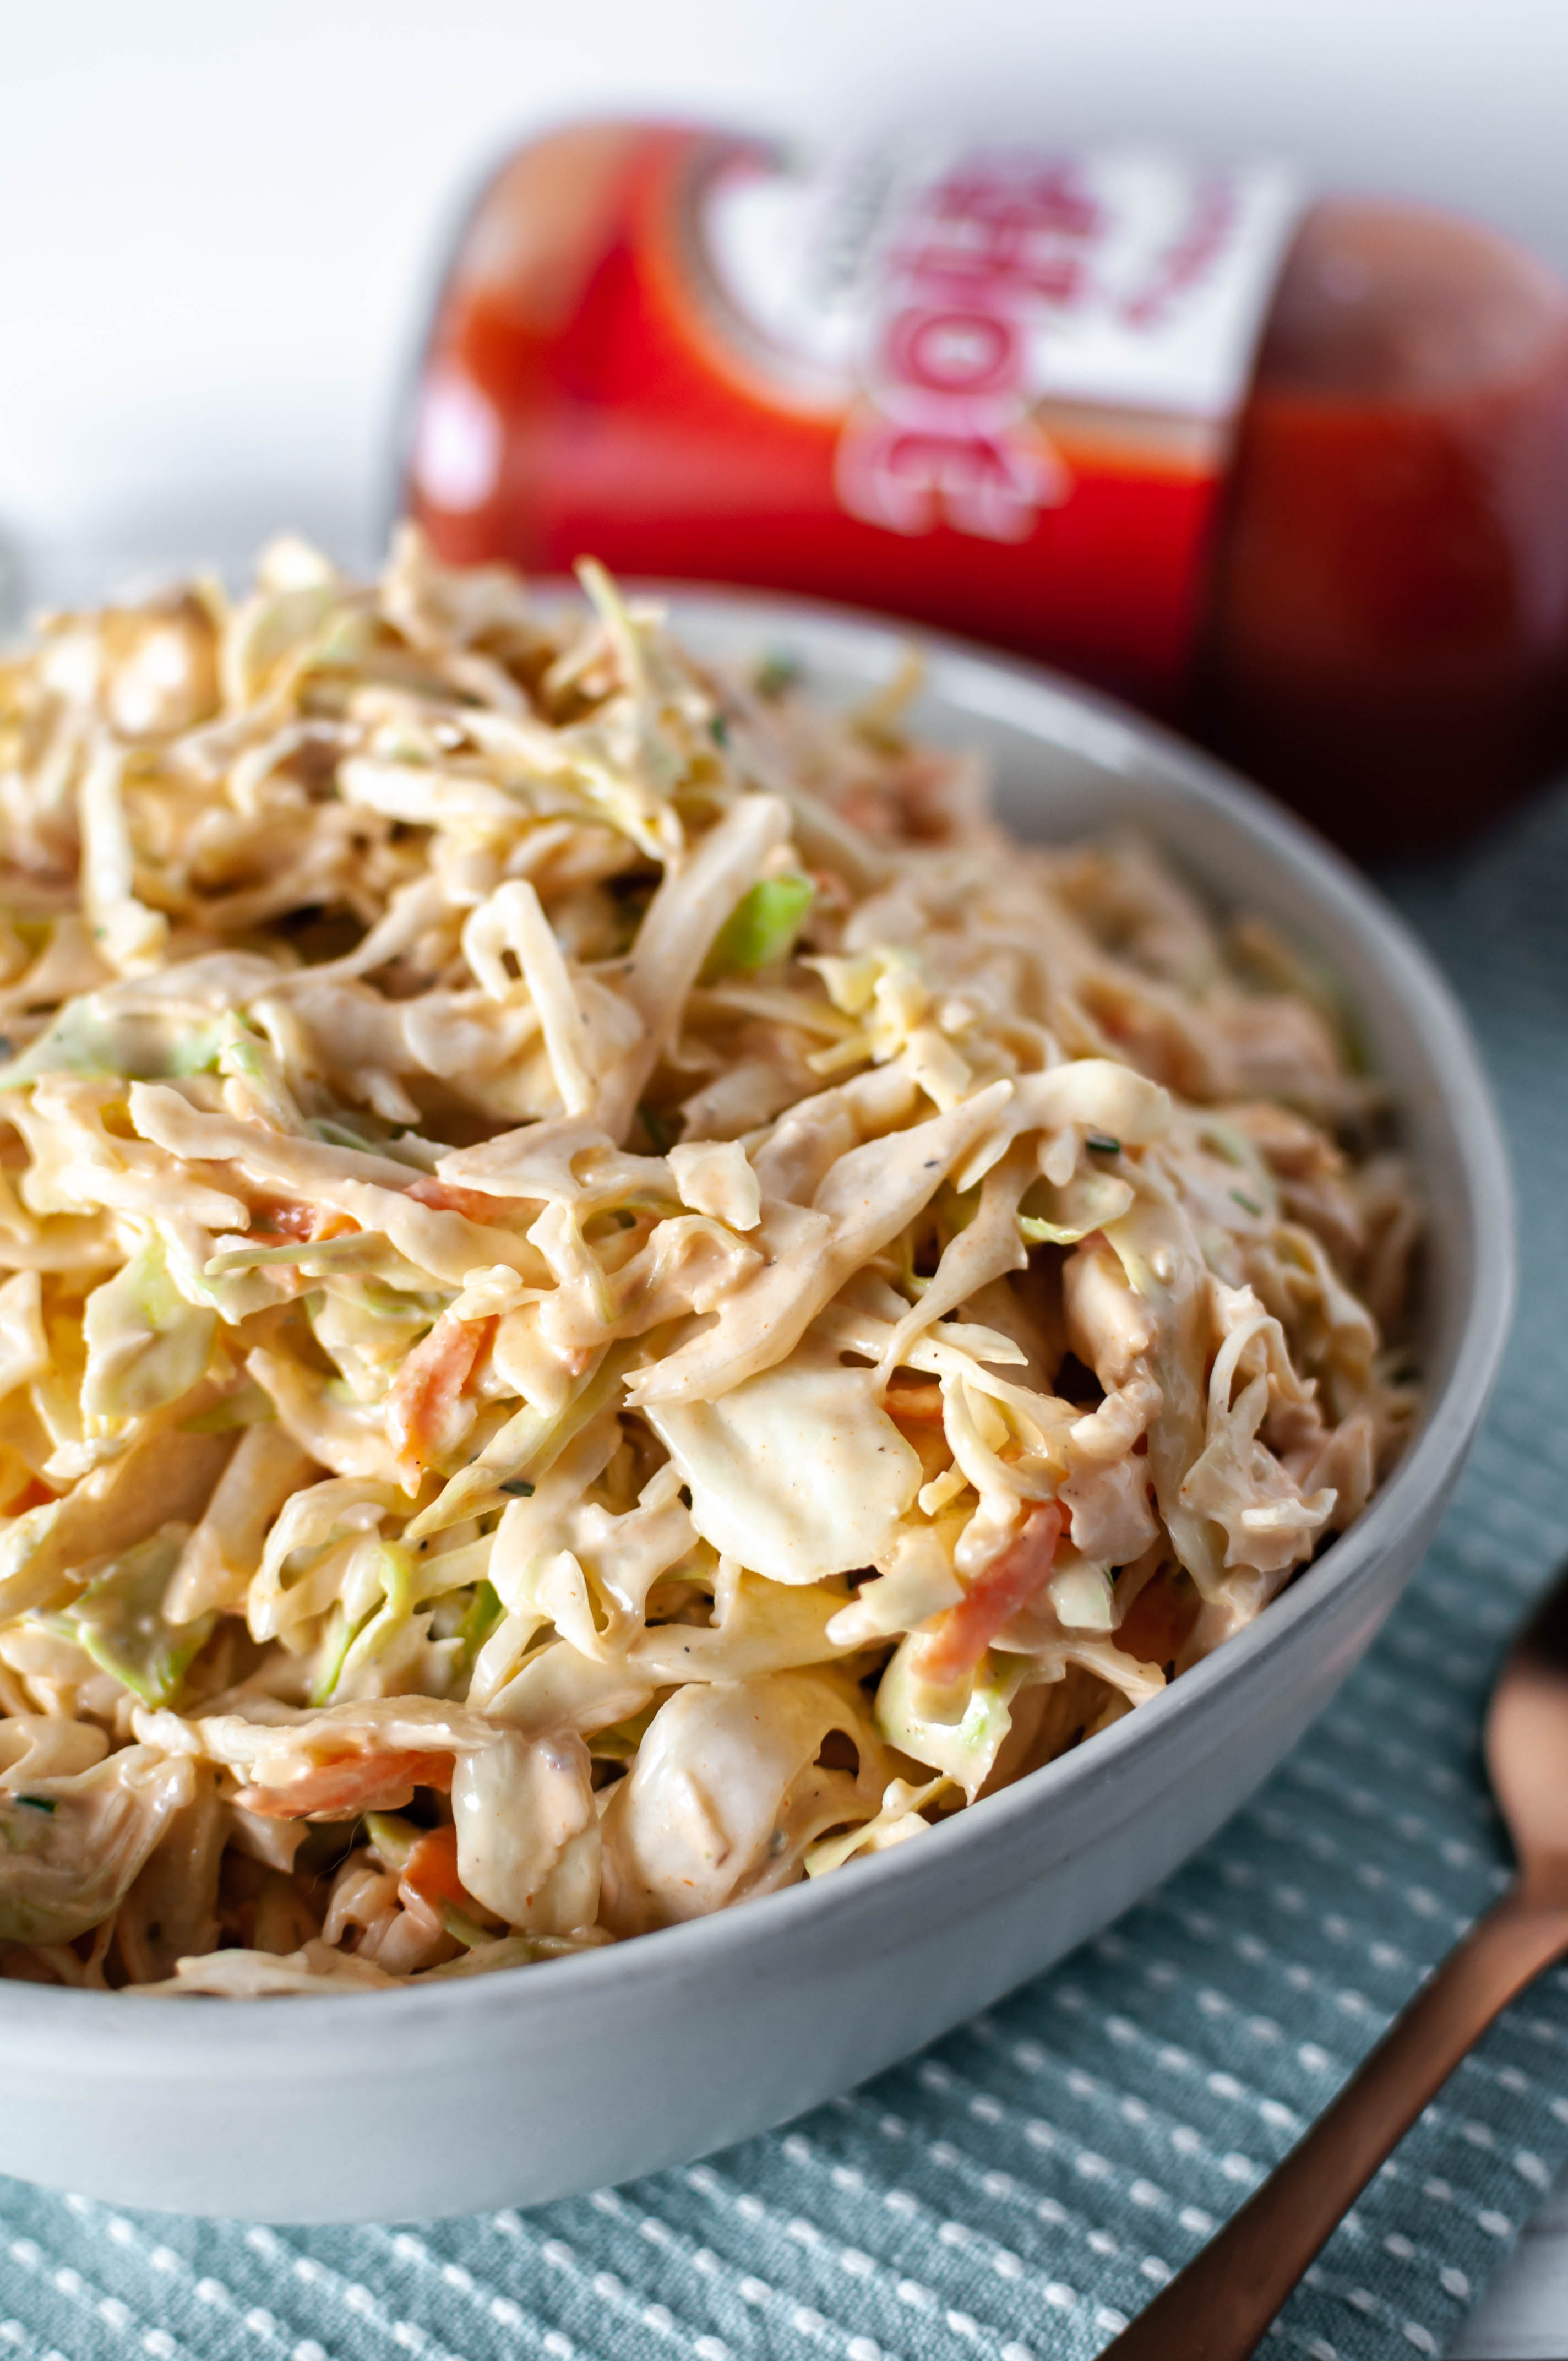 A classic American dish and a favorite flavor combine into one crazy delicious side dish. Buffalo Chicken Coleslaw is super creamy, slightly spicy and tangy and perfect for your next summer potluck.